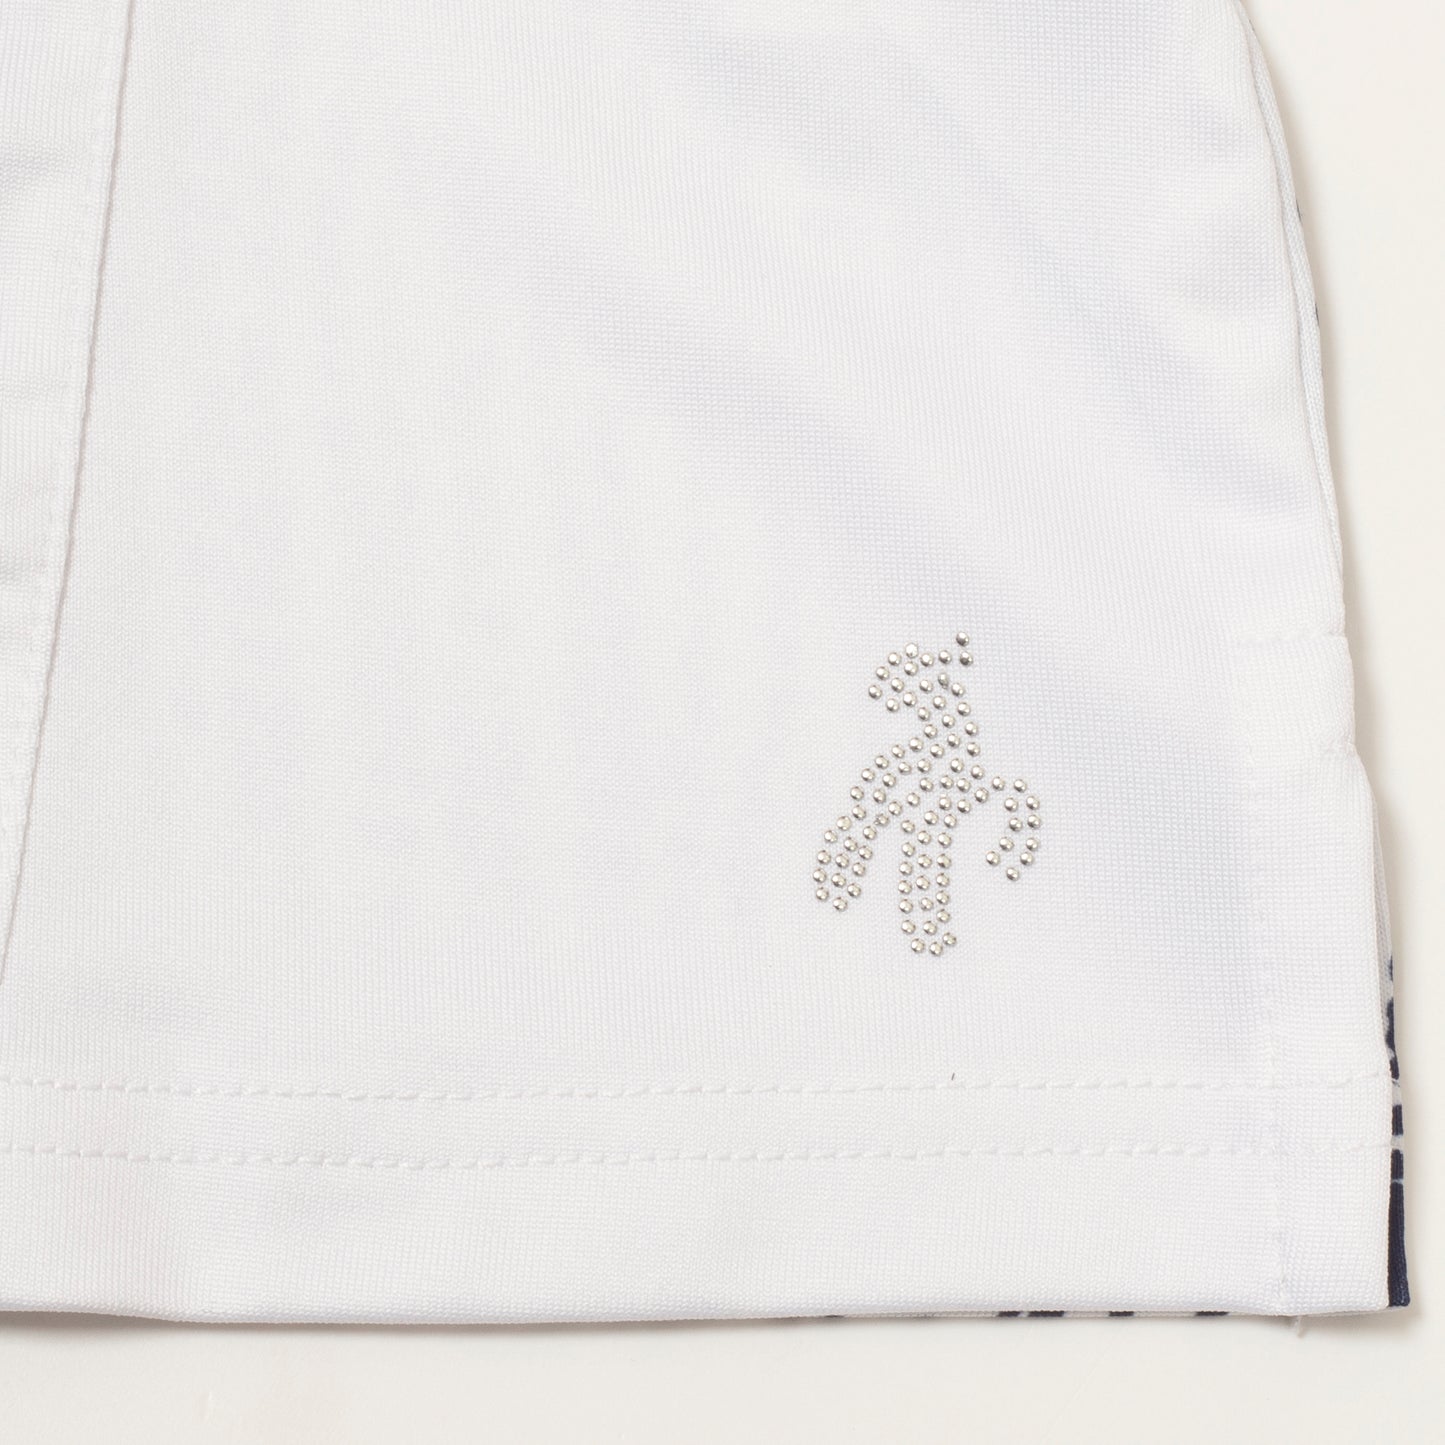 Green Lamb Ladies Sleeveless Polo Shirt with Contrasting Panels in White & Waterfall Print